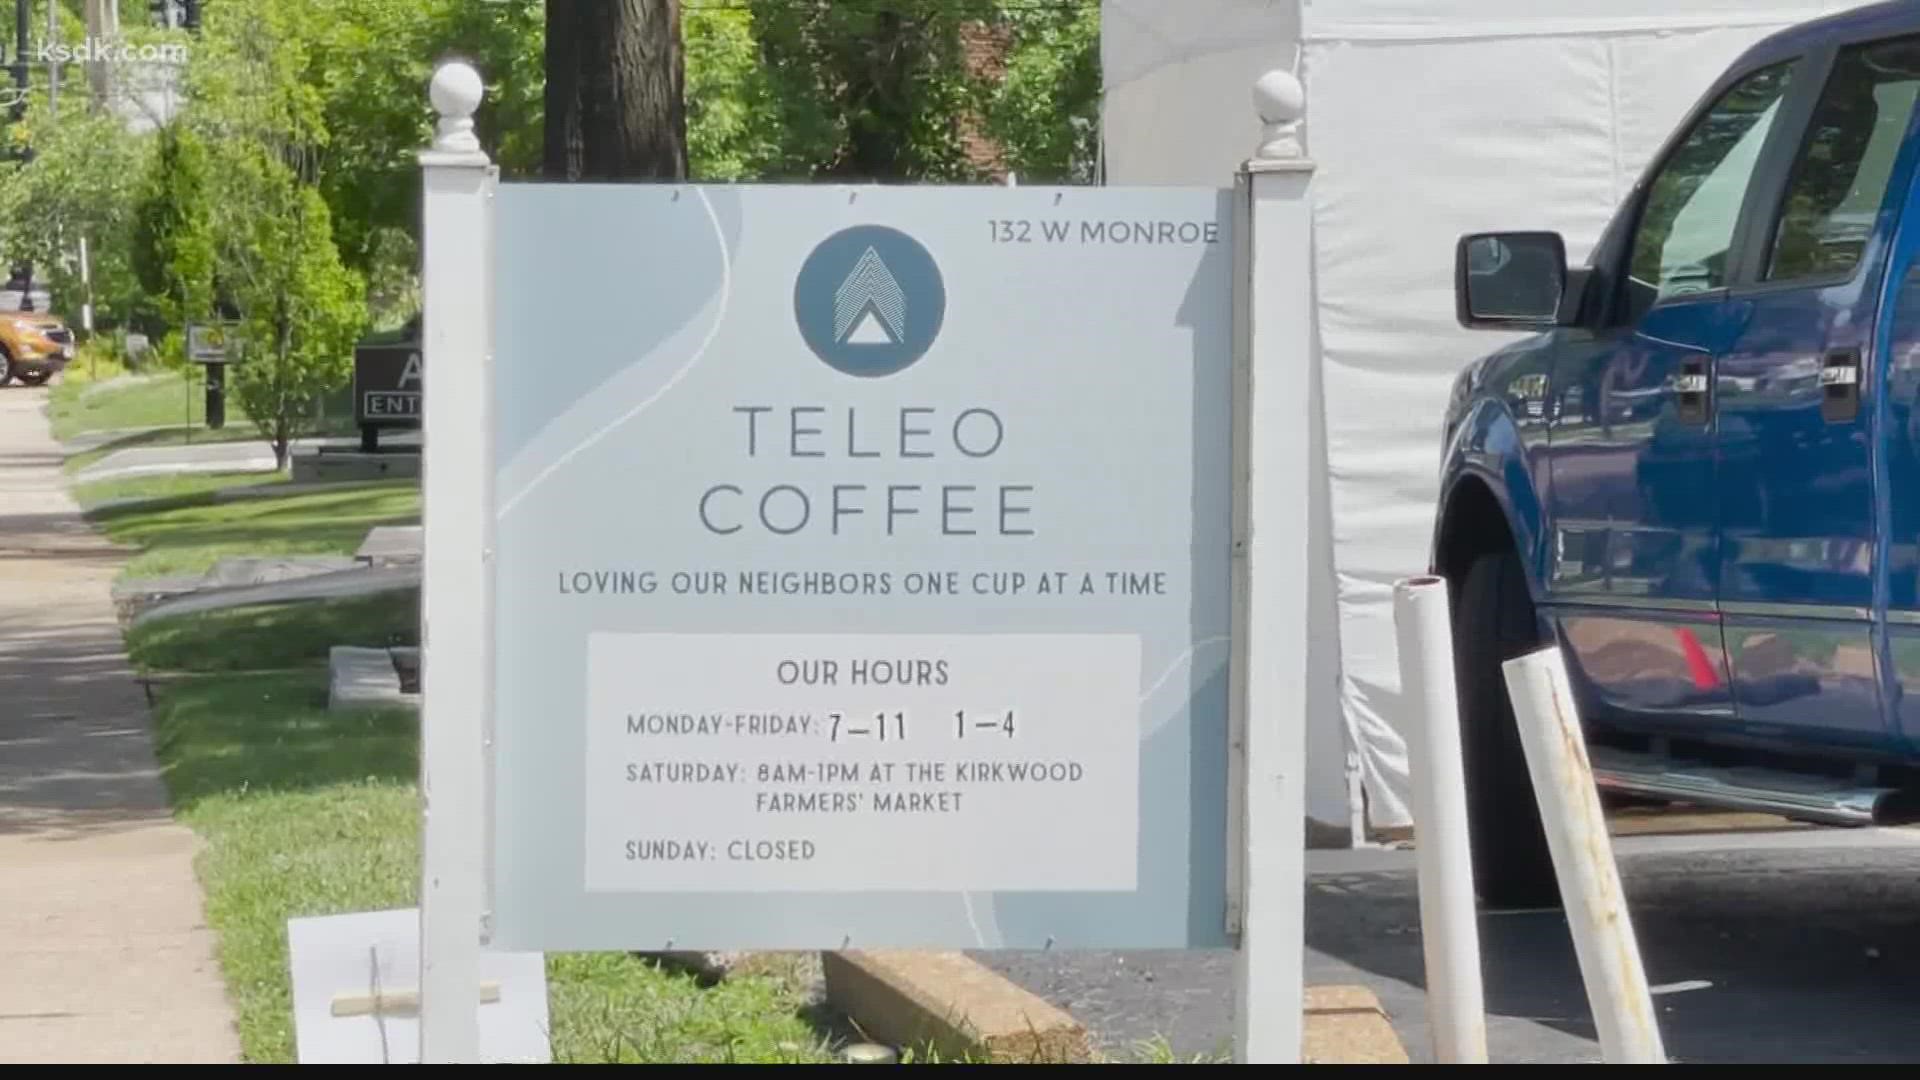 Teleo Coffee is actually a house, and the idea is to make customers feel more comfortable.